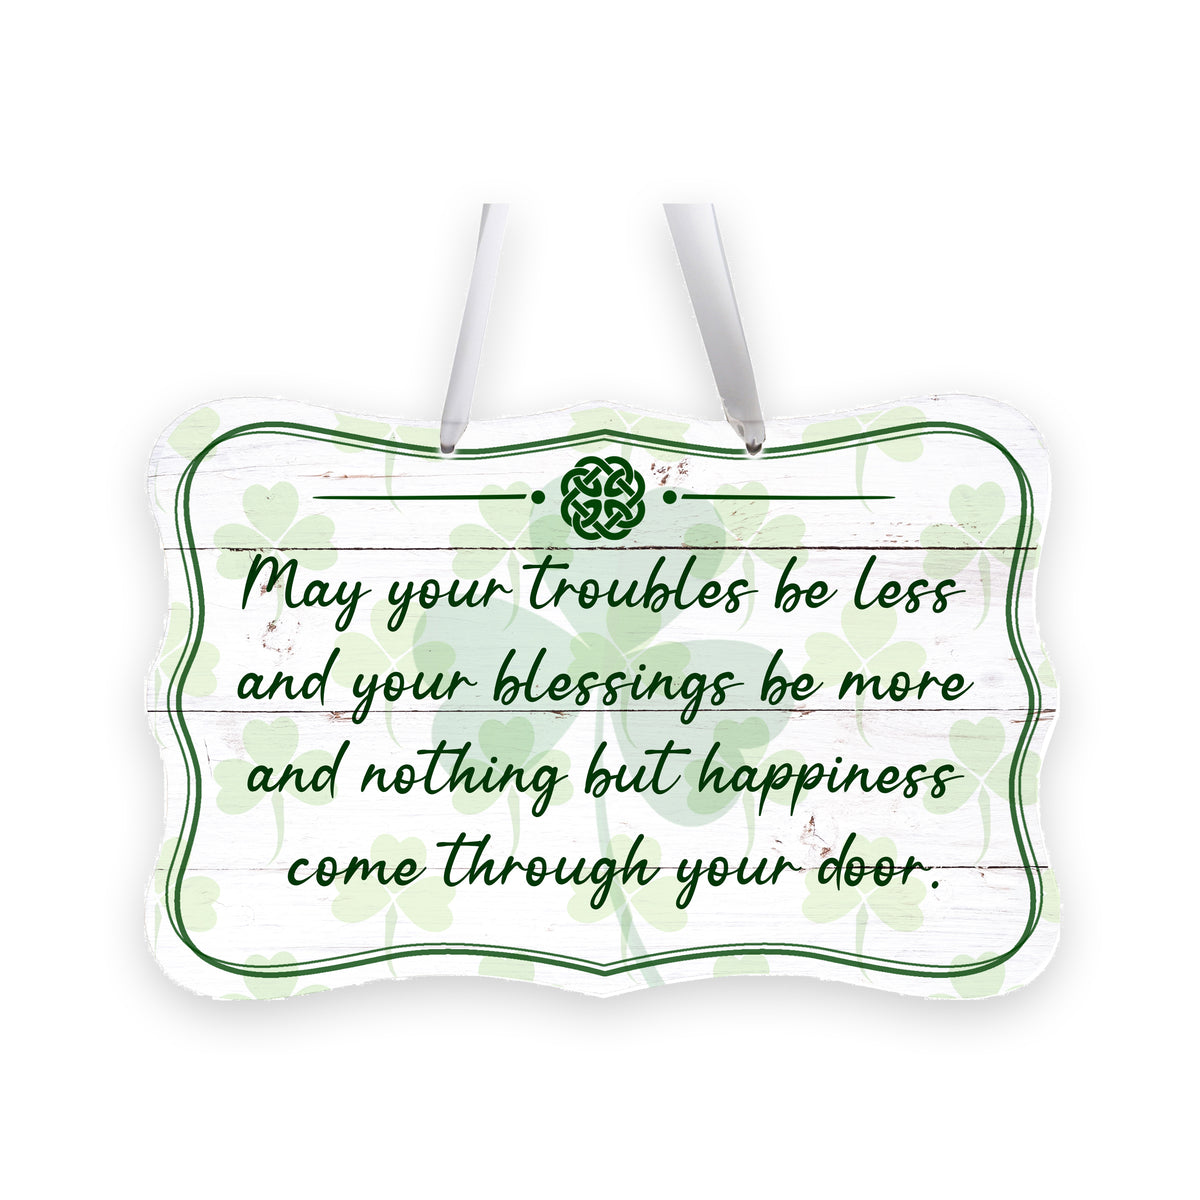 St. Patrick’s Day Irish Everyday Distressed Ribbon Wall Sign 8x12 - May Your Trouble Be Less